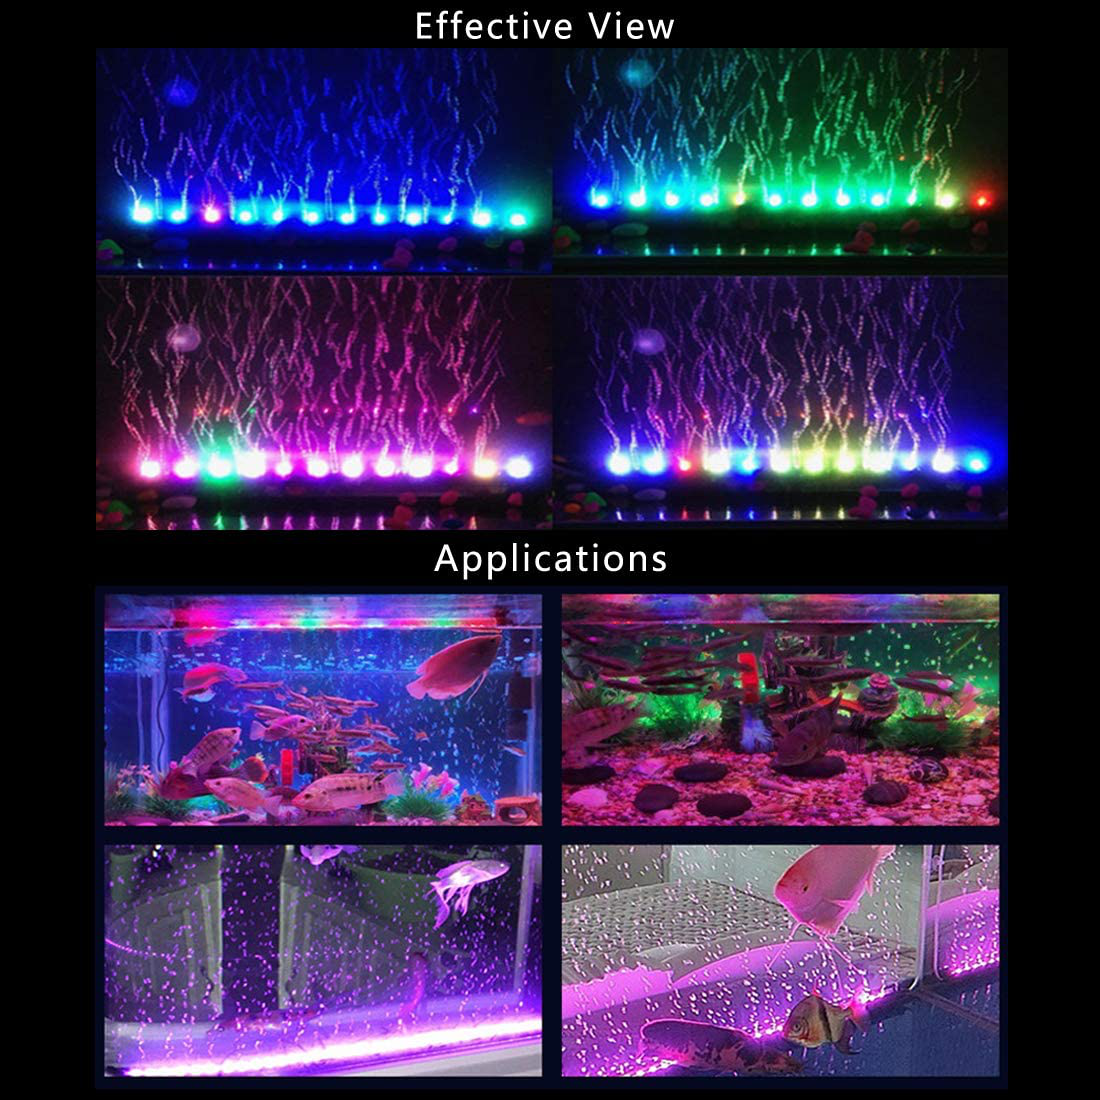 PULACO 1 Watt Aquarium Fish Tank Air Stone with Automatic Color Changing LED Light for Small Fish Tank Air Pump